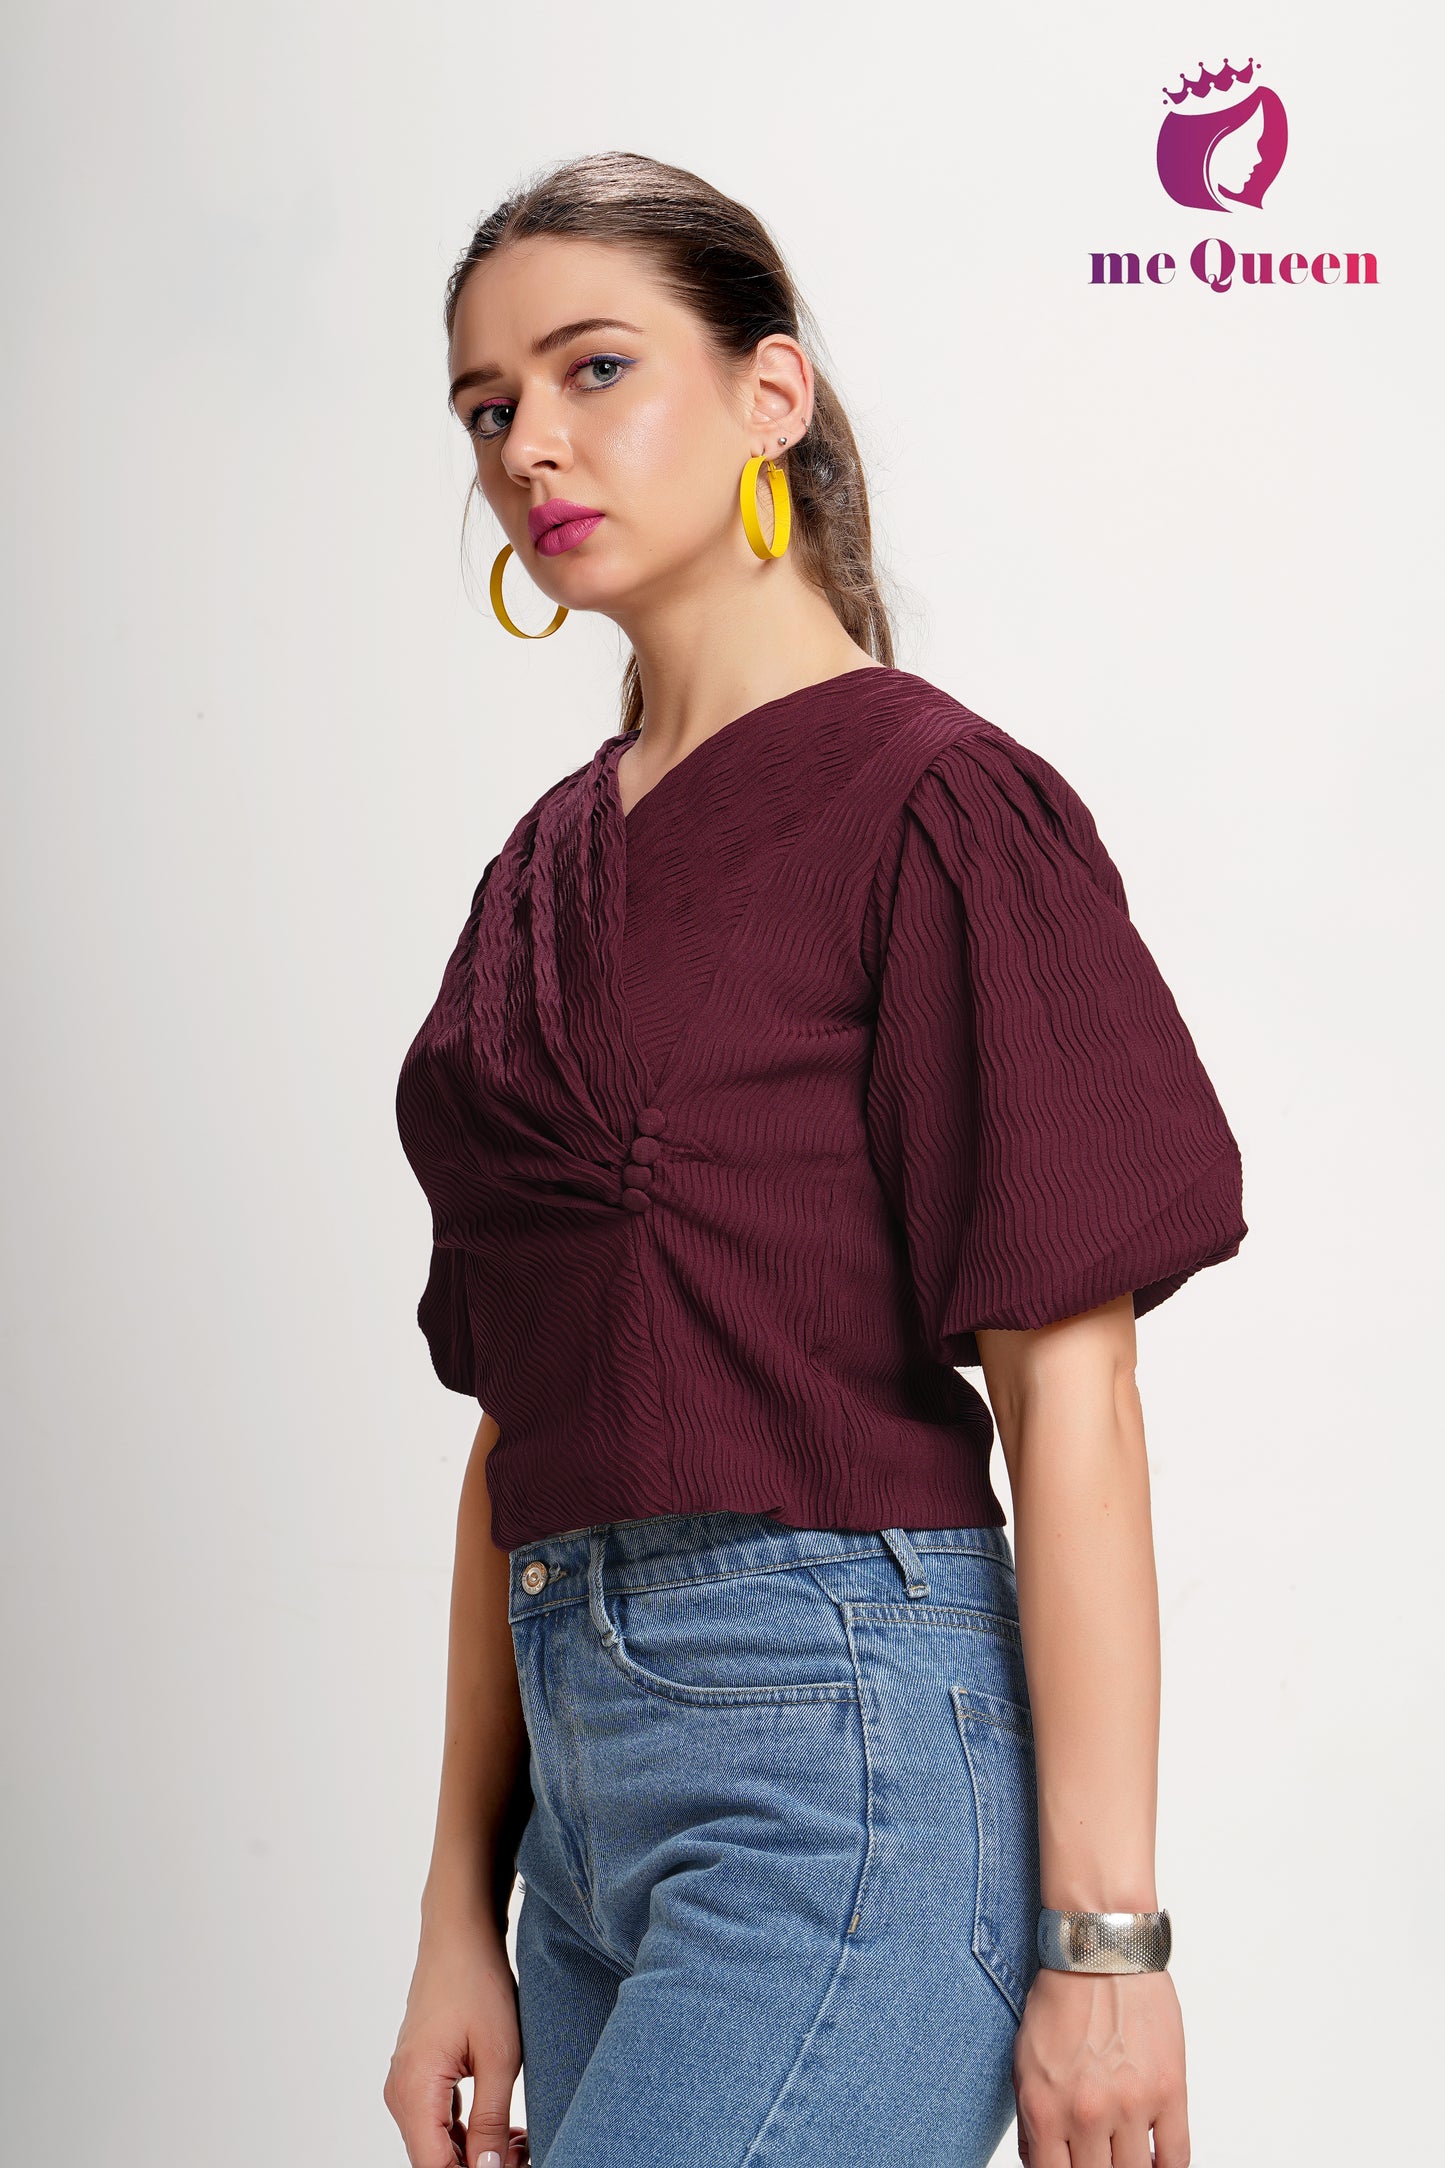 MeQueen's Women's Stylish Pattern Maroon Top with Puff Sleeves